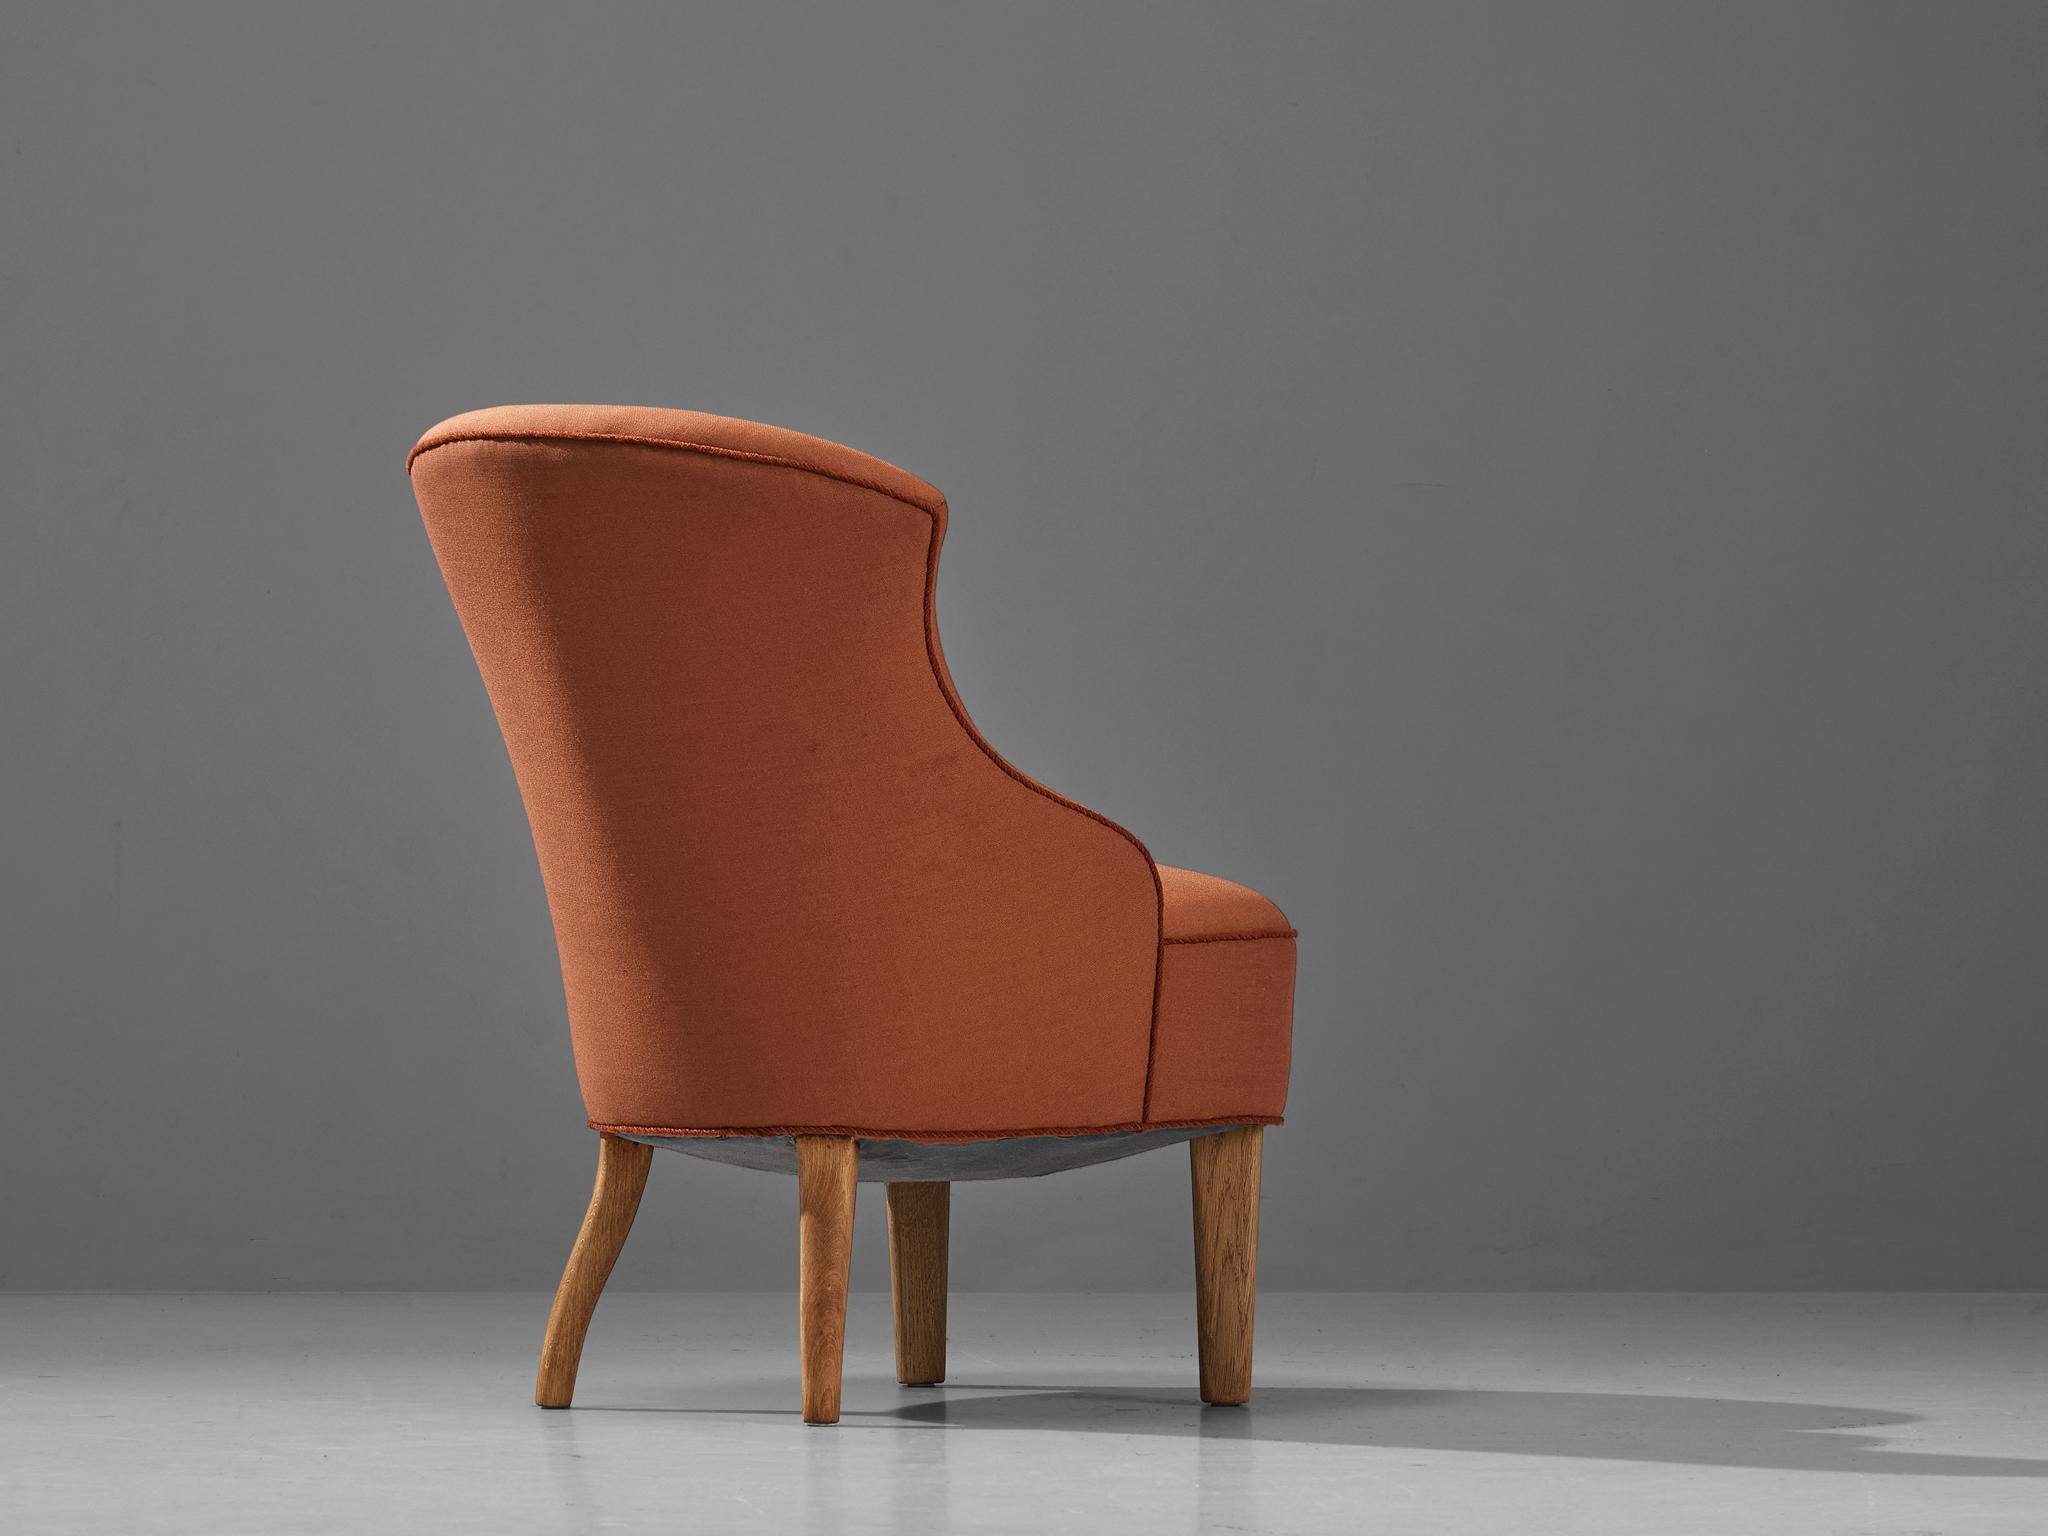 Mid-20th Century Danish Lounge Chair in Oak and Salmon Orange Upholstery